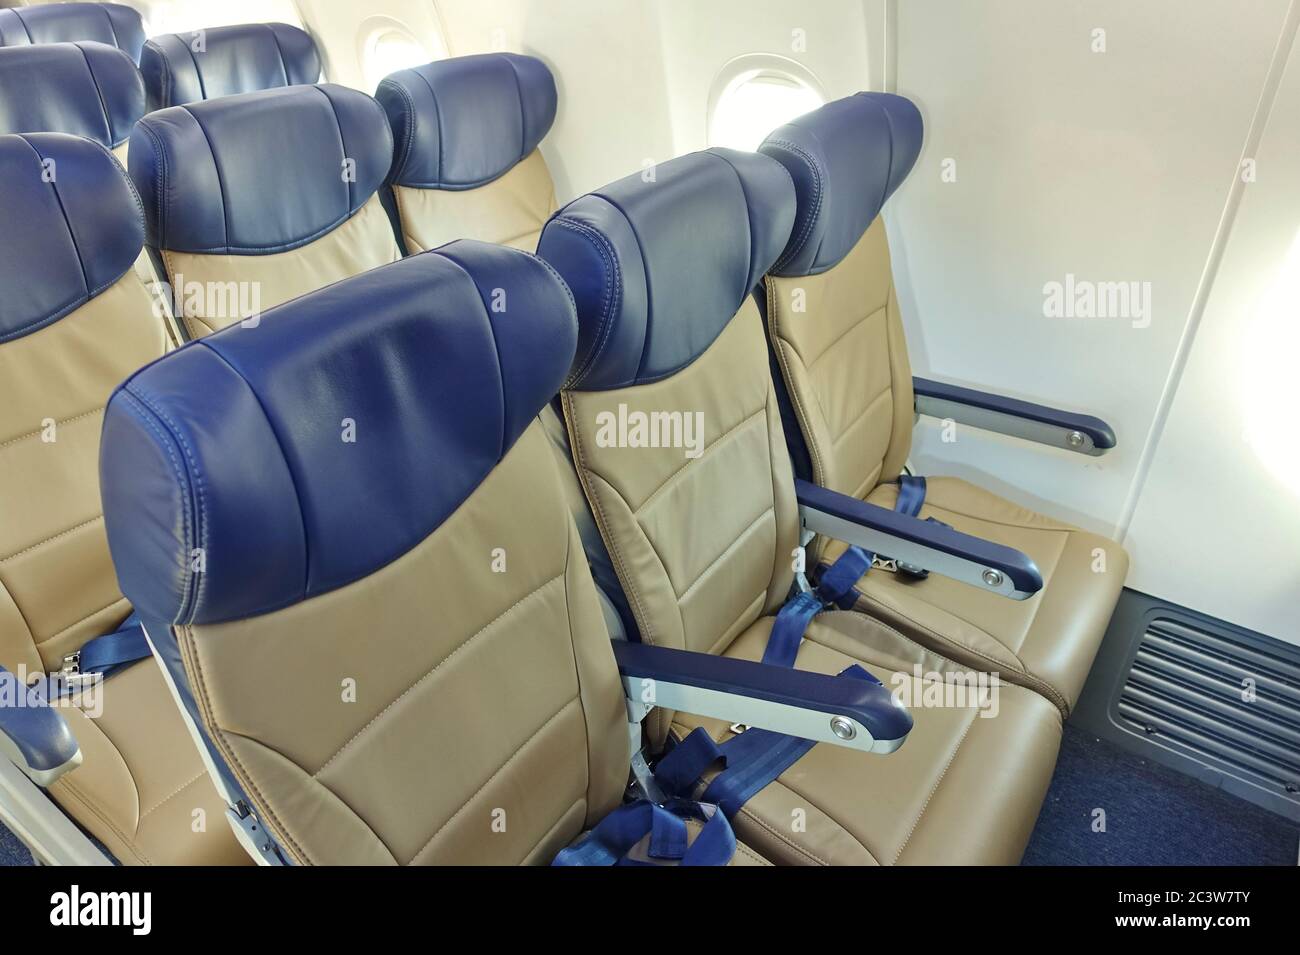 PHILADELPHIA, PA -13 JUN 2020- Interior view of empty seats on an airplane from Southwest Airlines (WN). Stock Photo